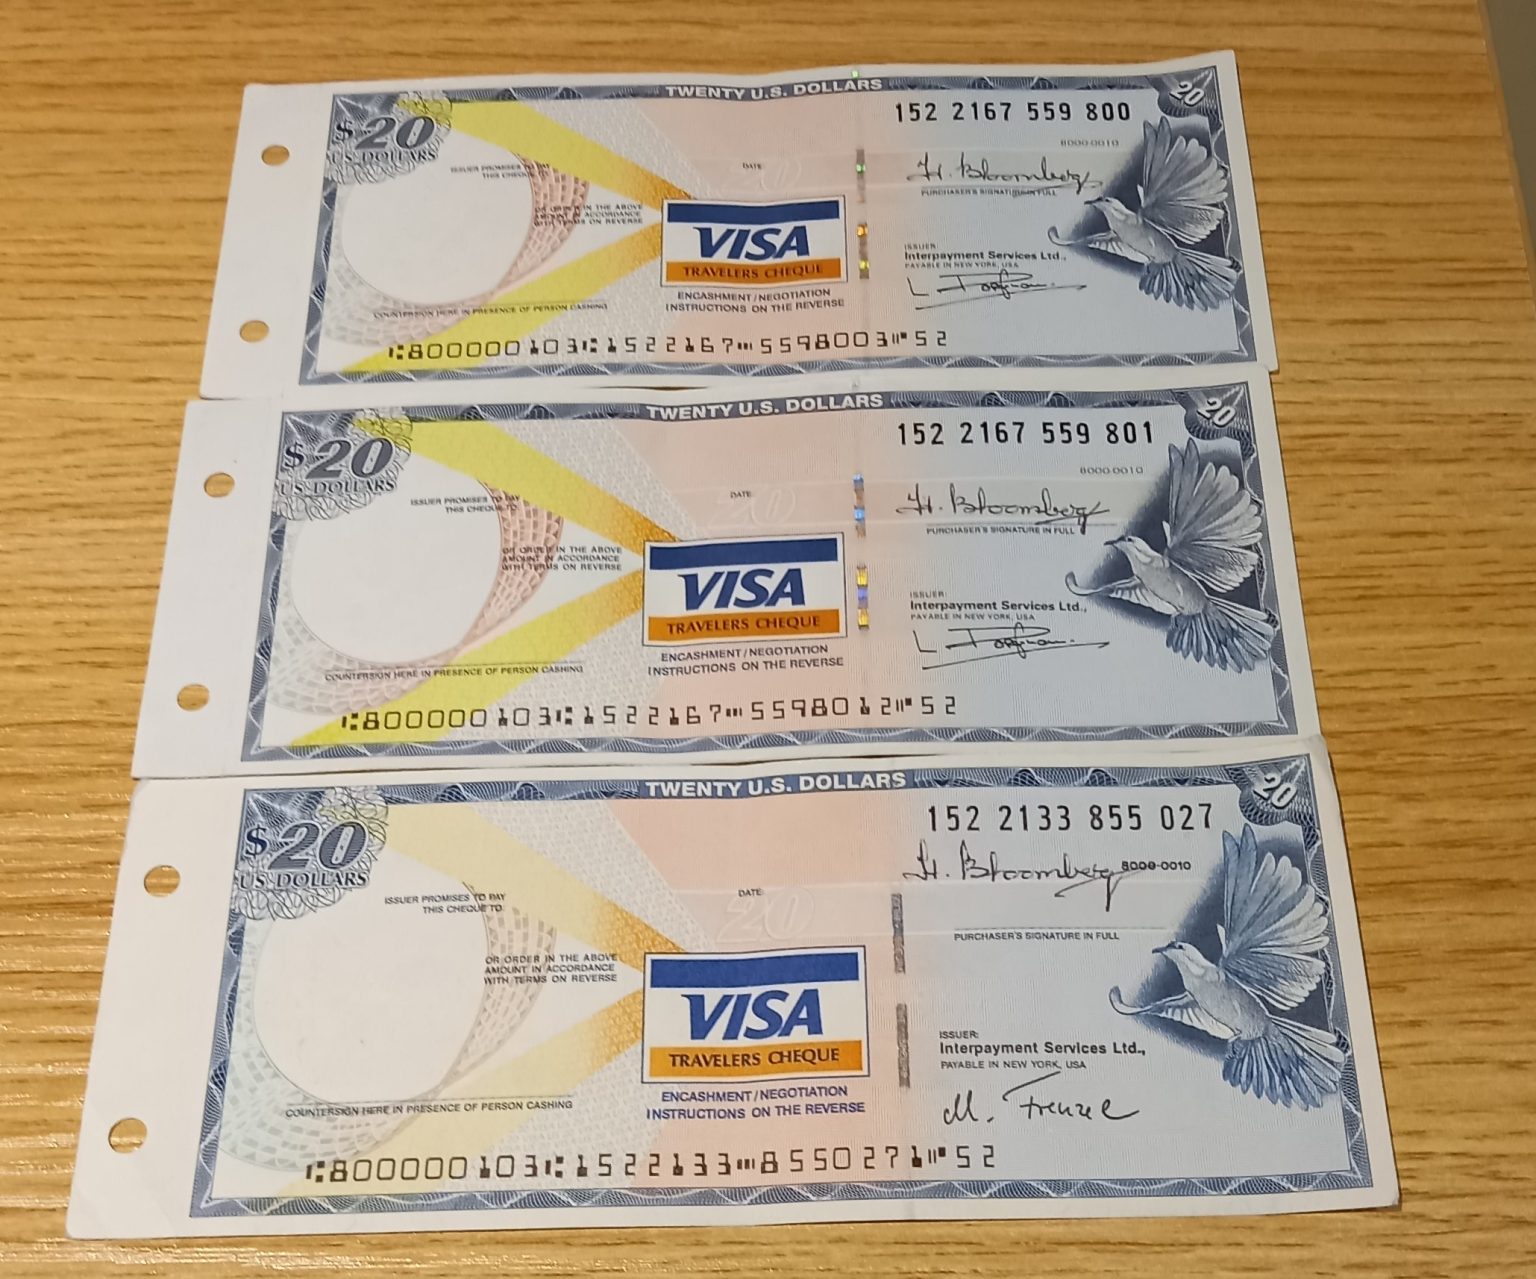 British Banknote Seller 20 USA VISA Travelers Cheques 3 Not Cashed In